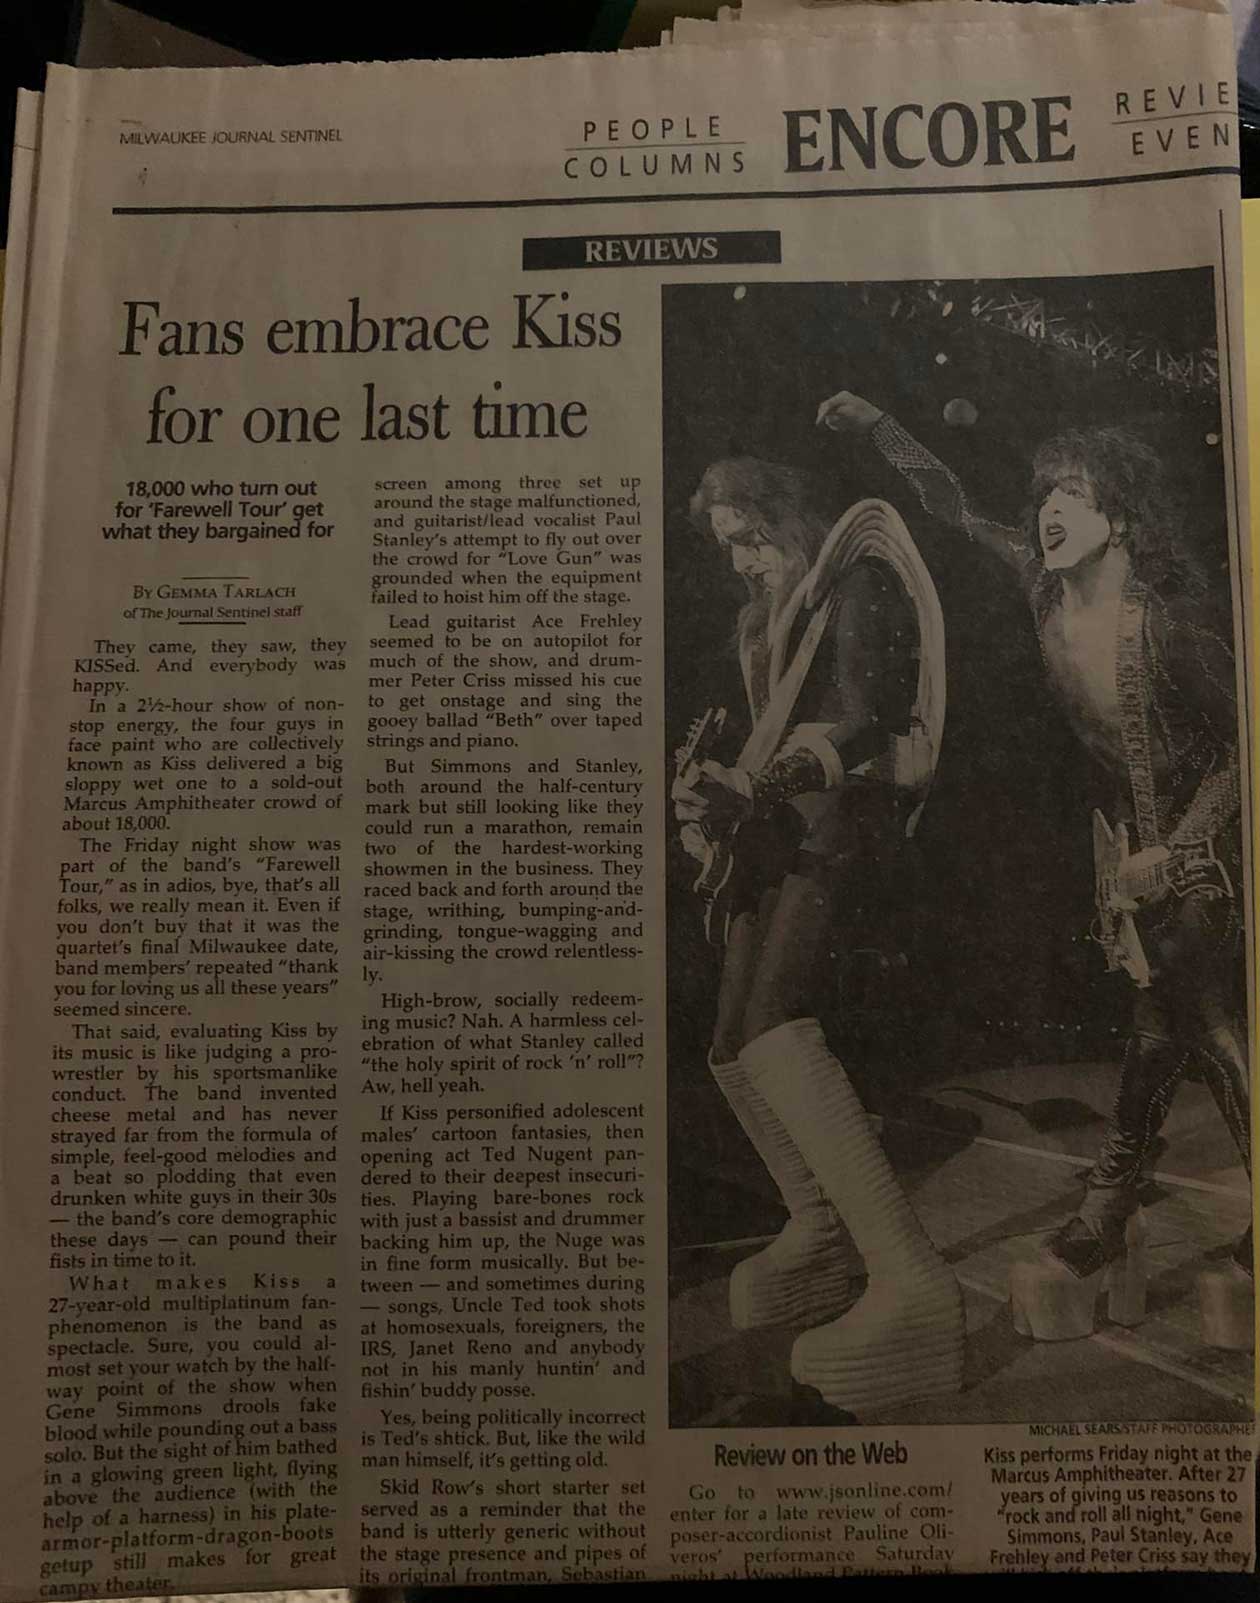 Review from Milwaukee, WI, USA 19 May 2000 show